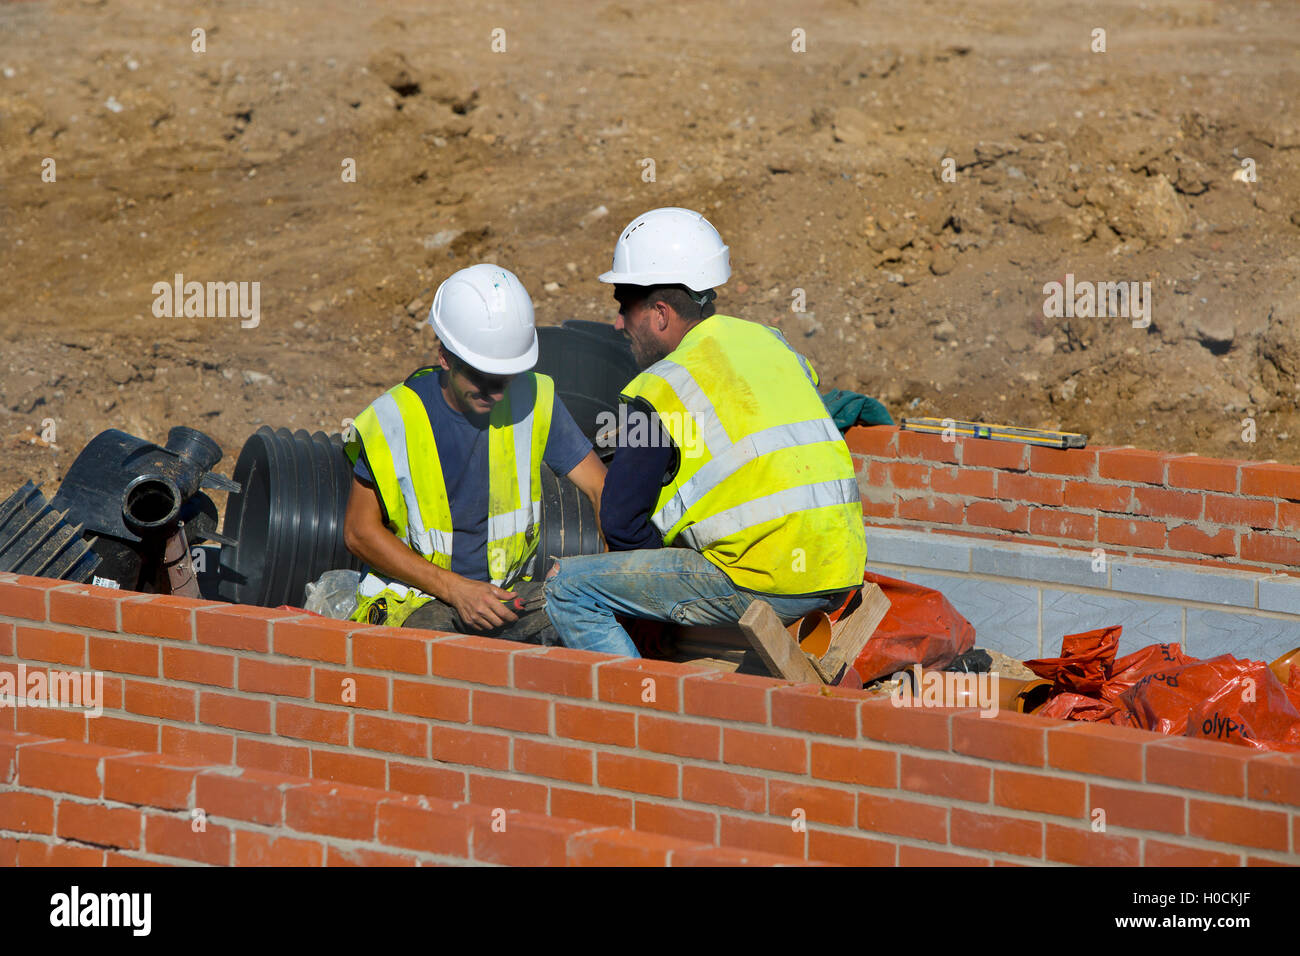 Two construction workers on a building site Stock Photo